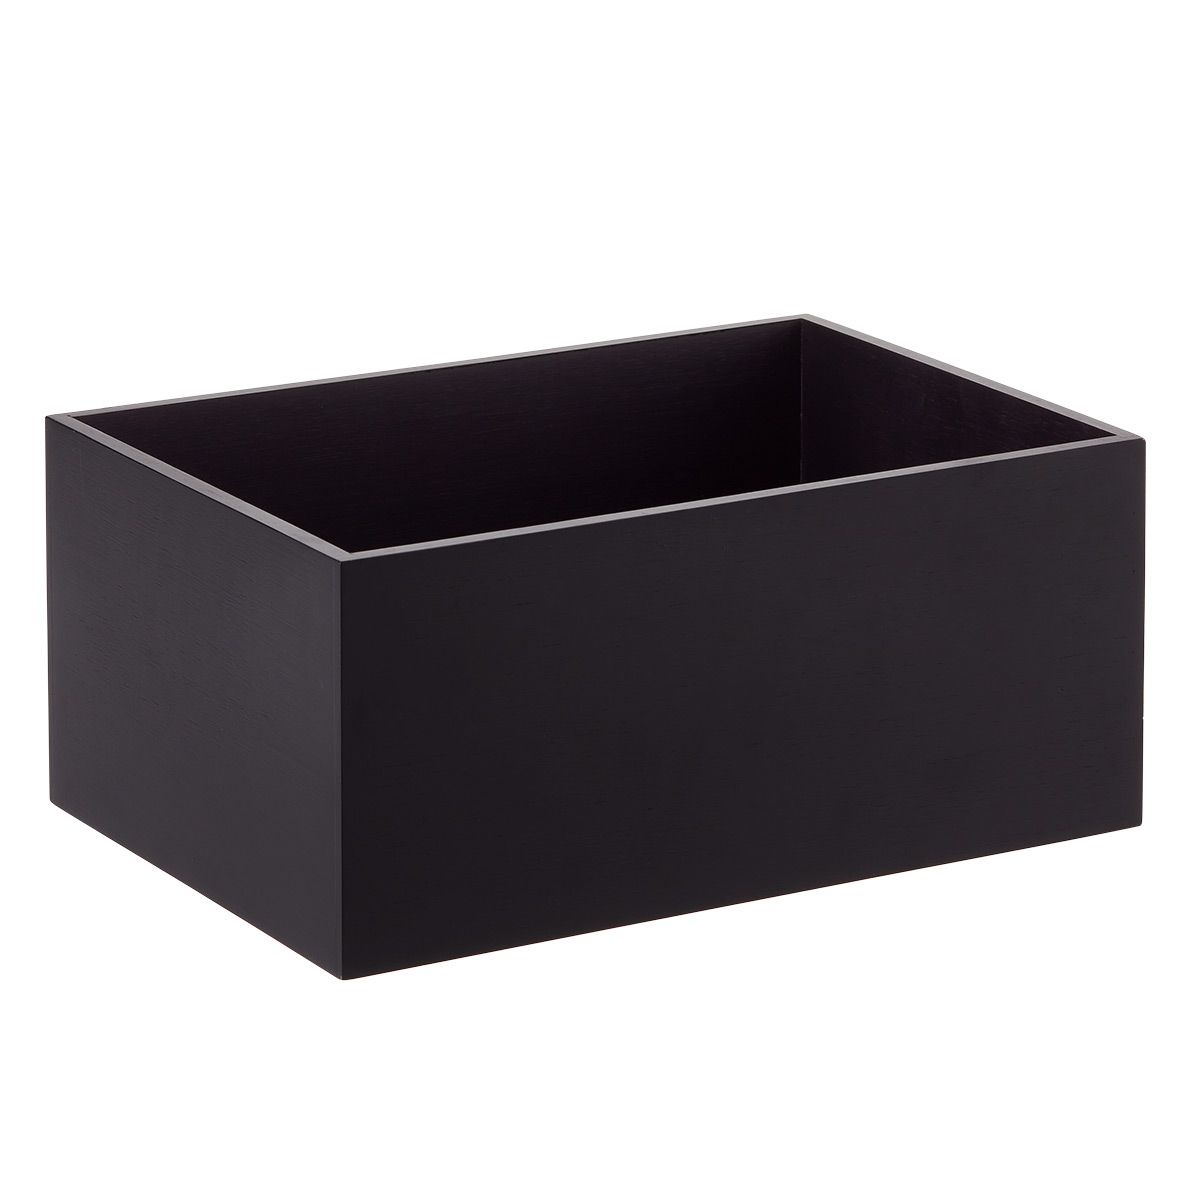 The Container Store Large Artisan Bamboo Bin Black | The Container Store